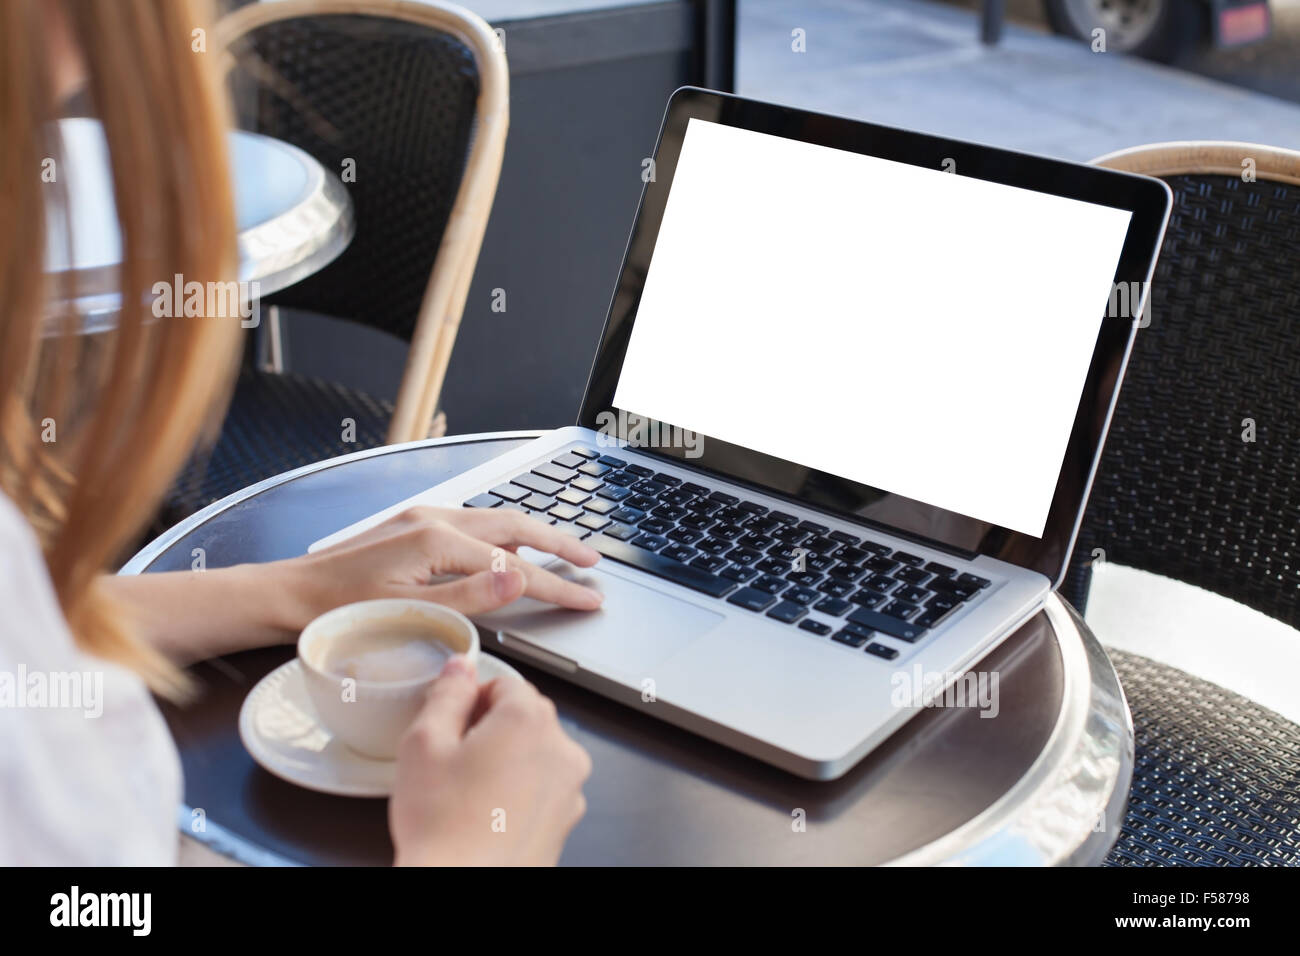 woman using laptop with empty screen in cafe Stock Photo